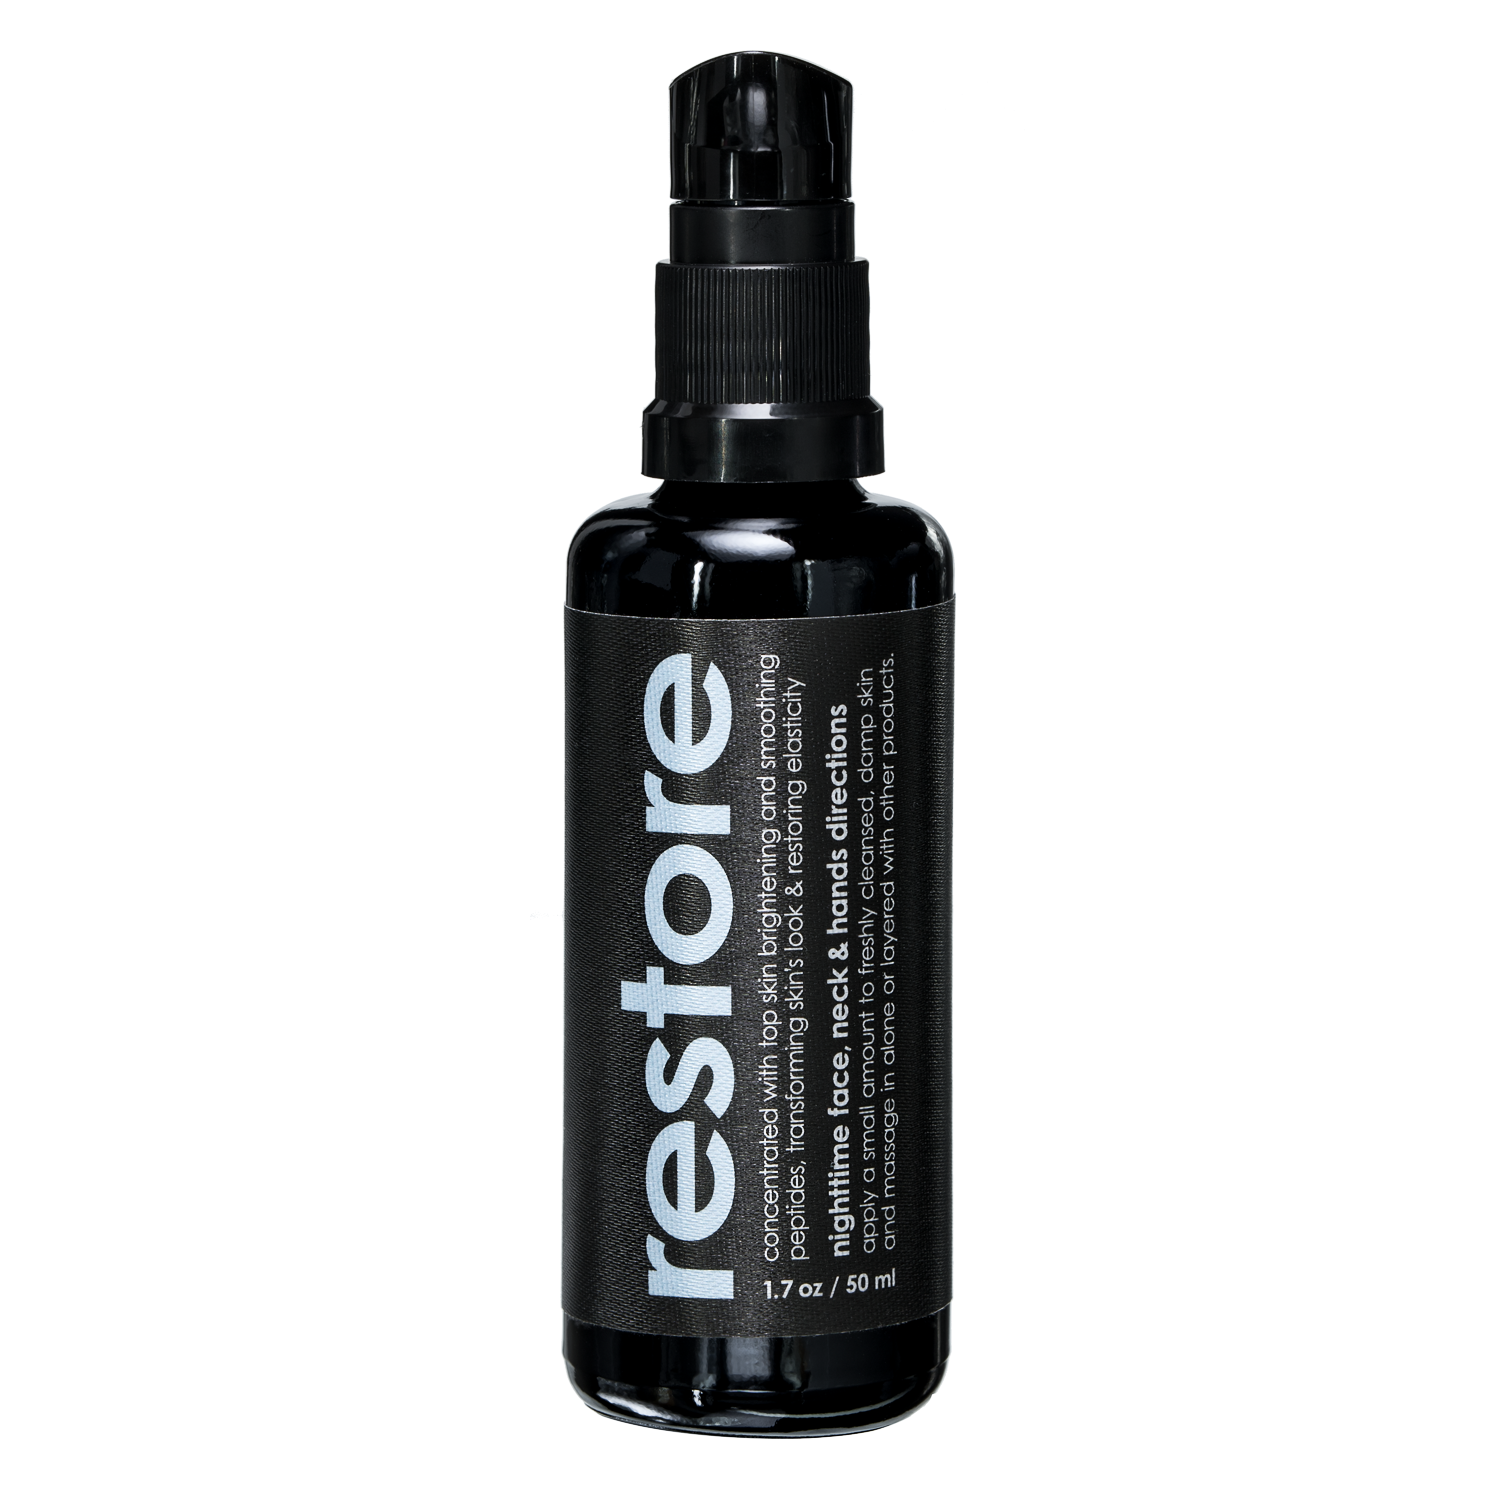 Bottle of Restore Nighttime Treatment Serum by Your Best Face